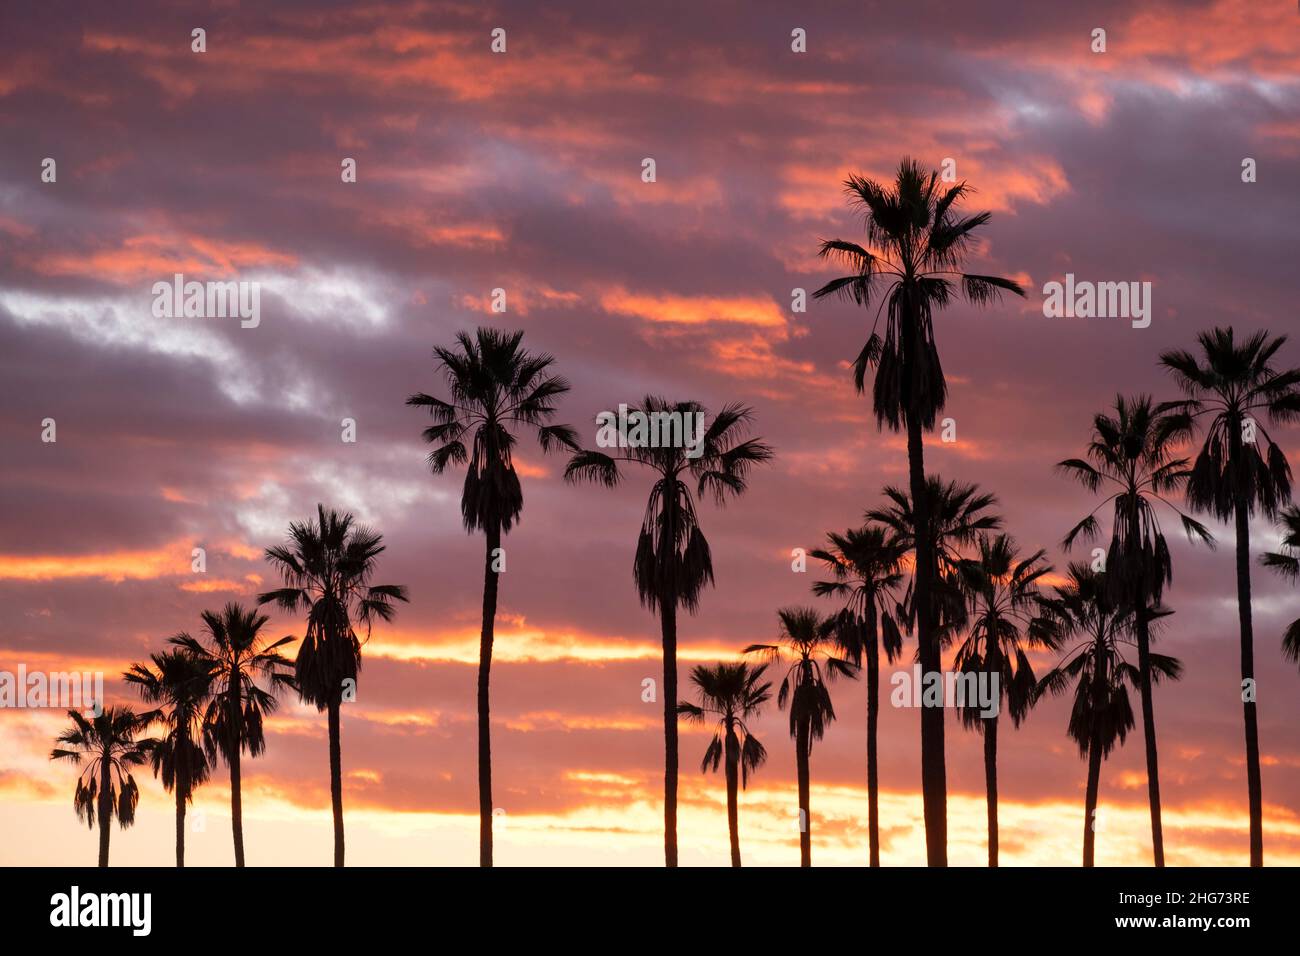 Silhouette of a row of palm trees at sunset with a pink and orange sky Stock Photo